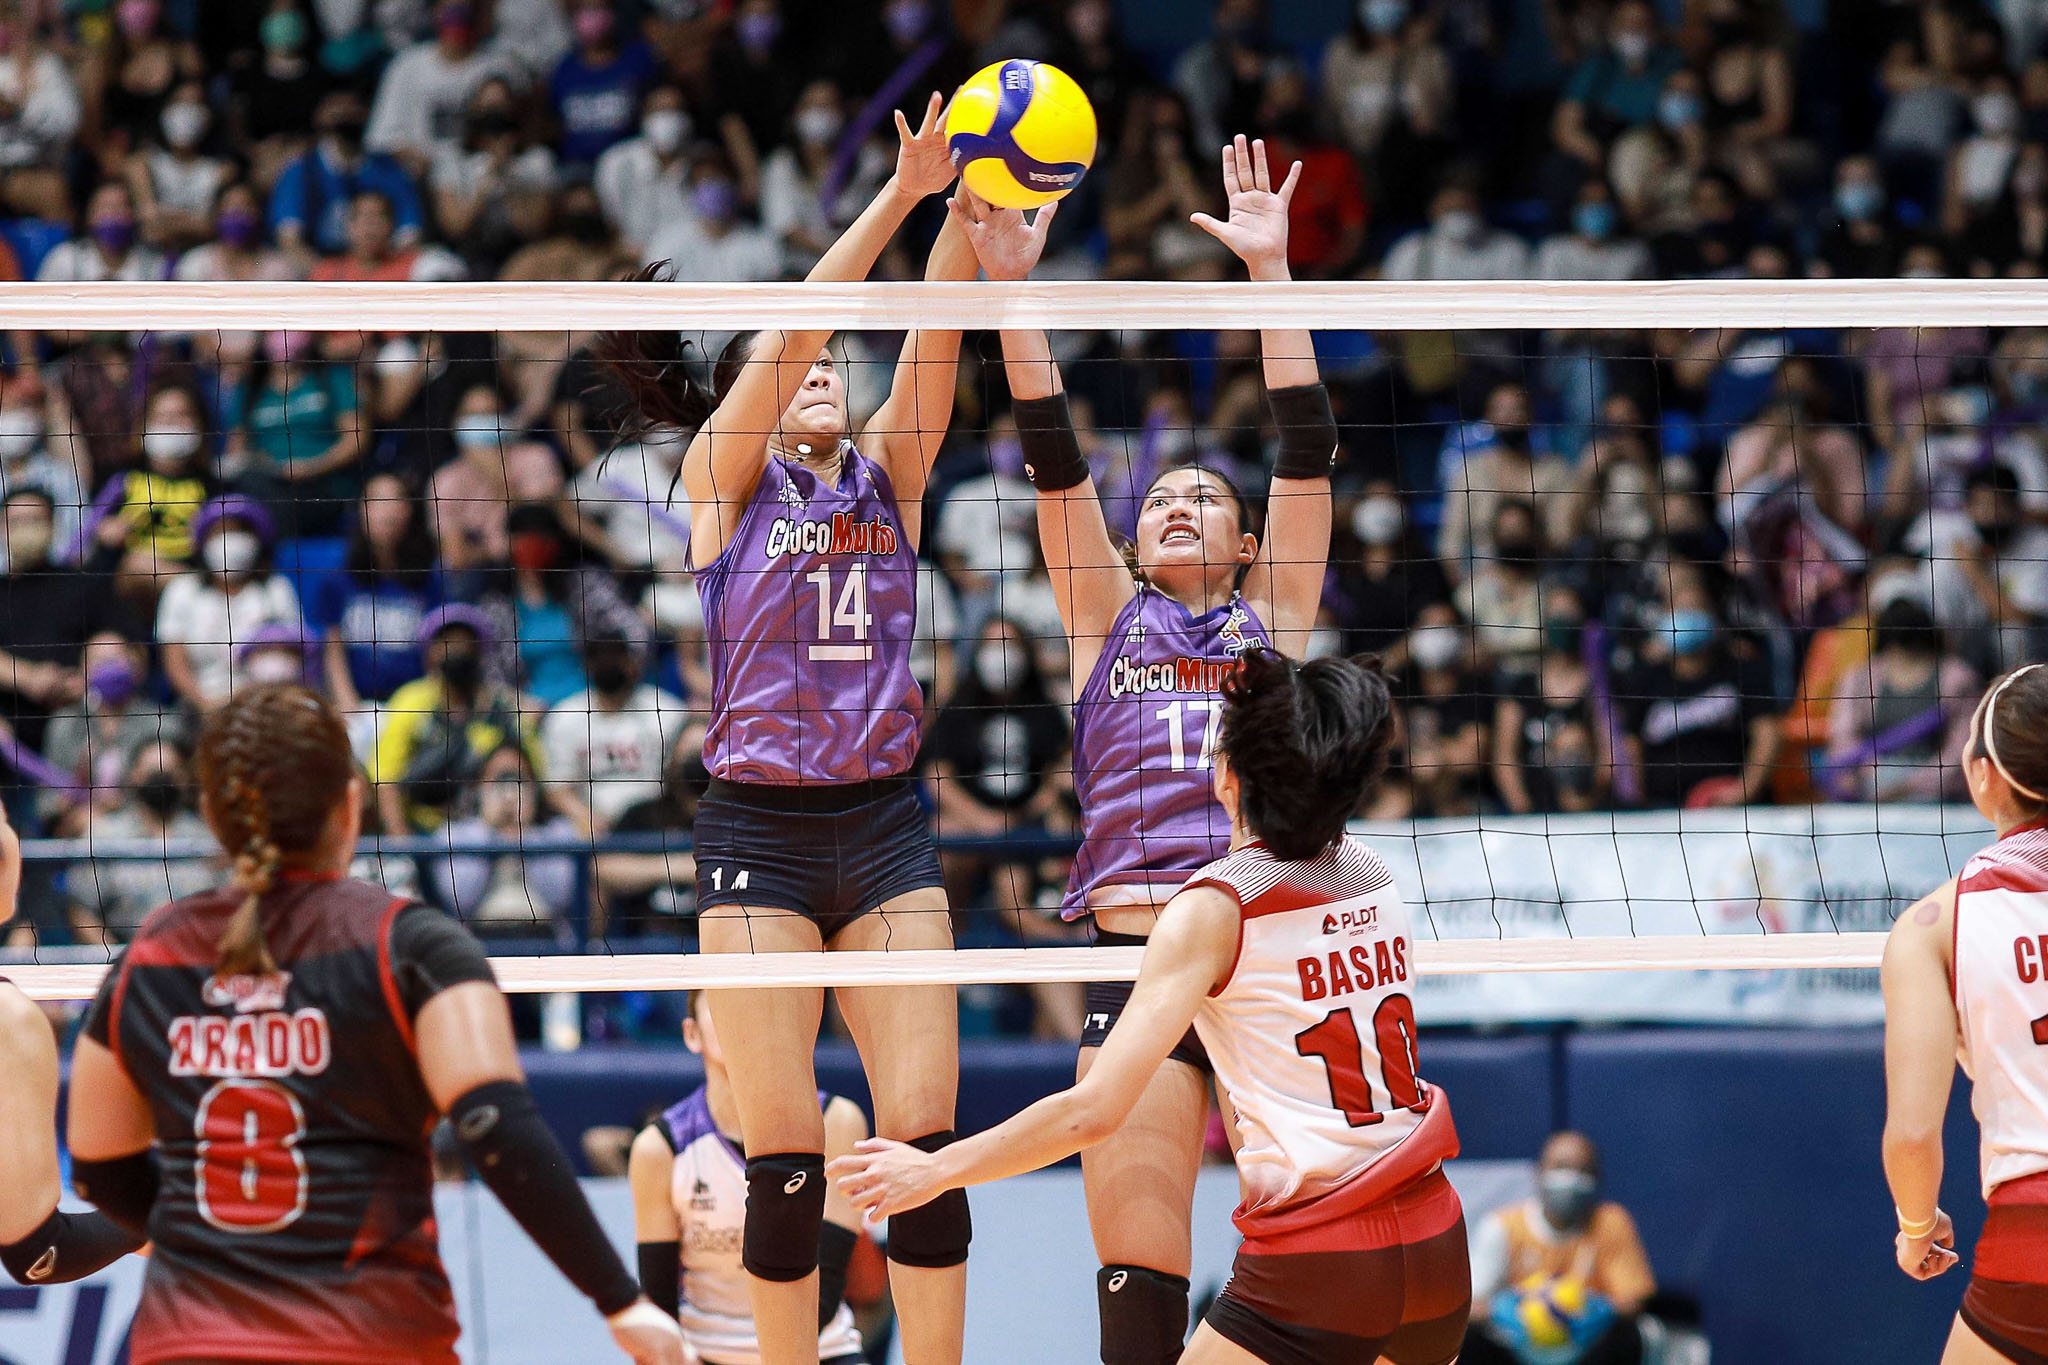 2022-PVL-ChocoMucho-vs-PLDT-Bea-De-Leon-Isa-Molde Tolentino glad to have Molde, Ogunsanya on her side now News PVL Volleyball  - philippine sports news